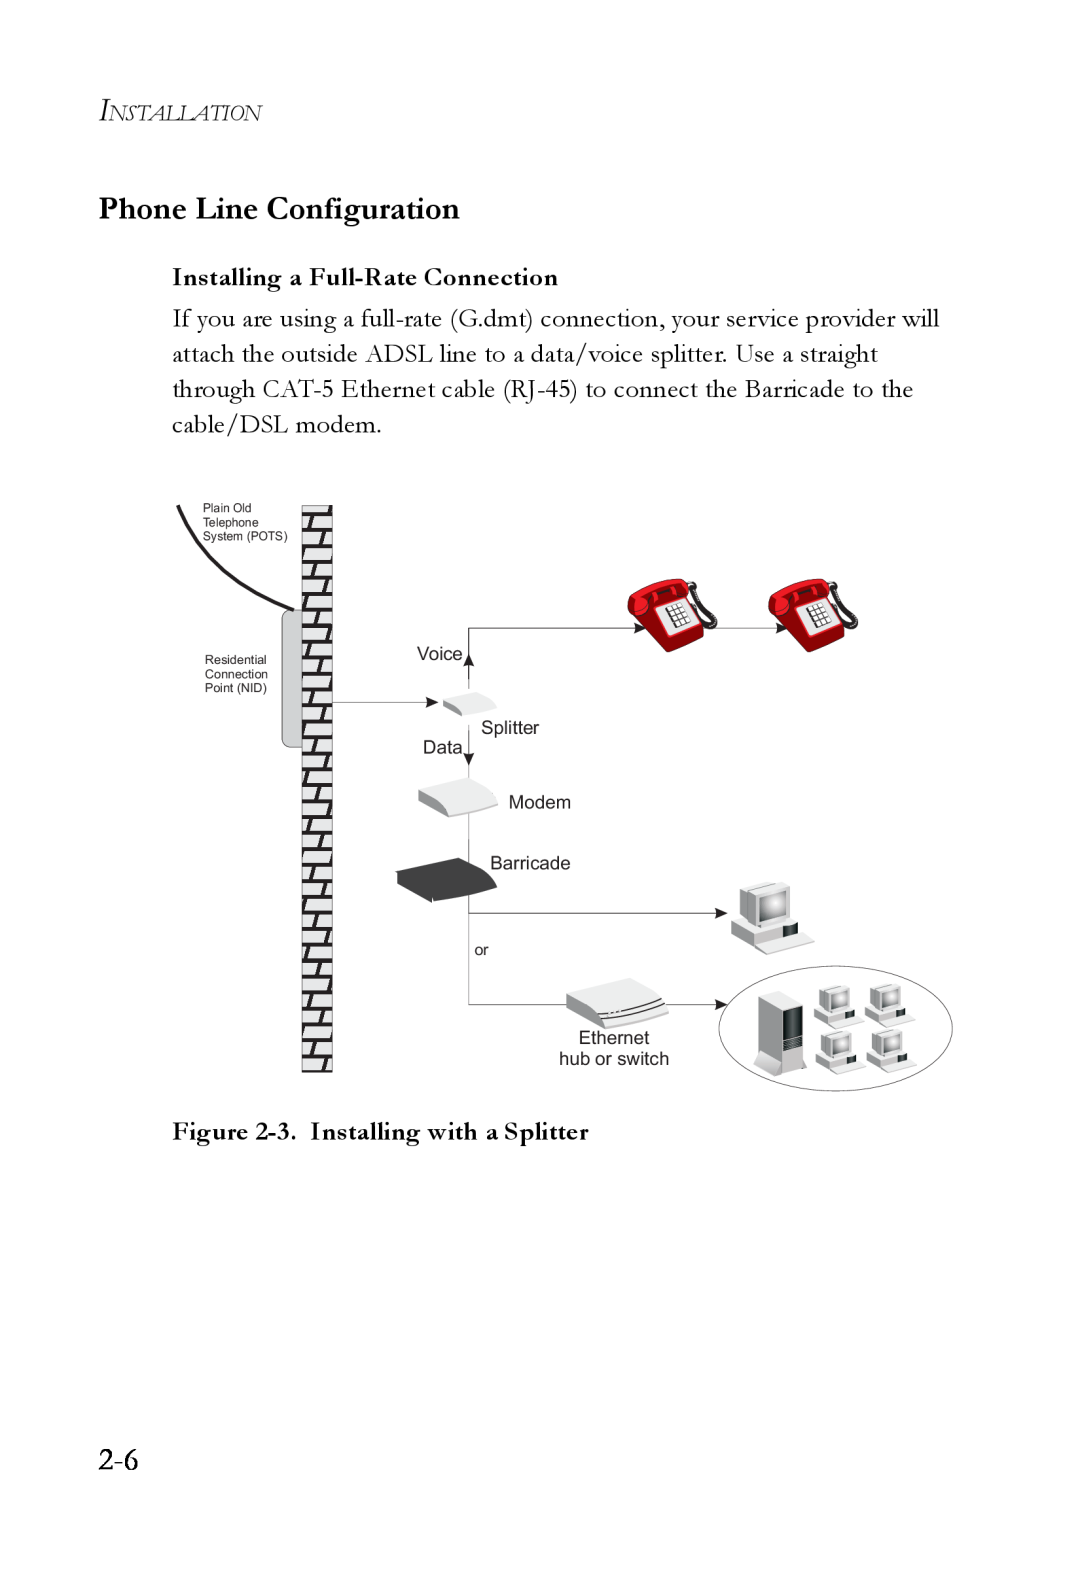 SMC Networks SMCWBR14T-G manual Phone Line Configuration, Installing a Full-Rate Connection, 3. Installing with a Splitter 